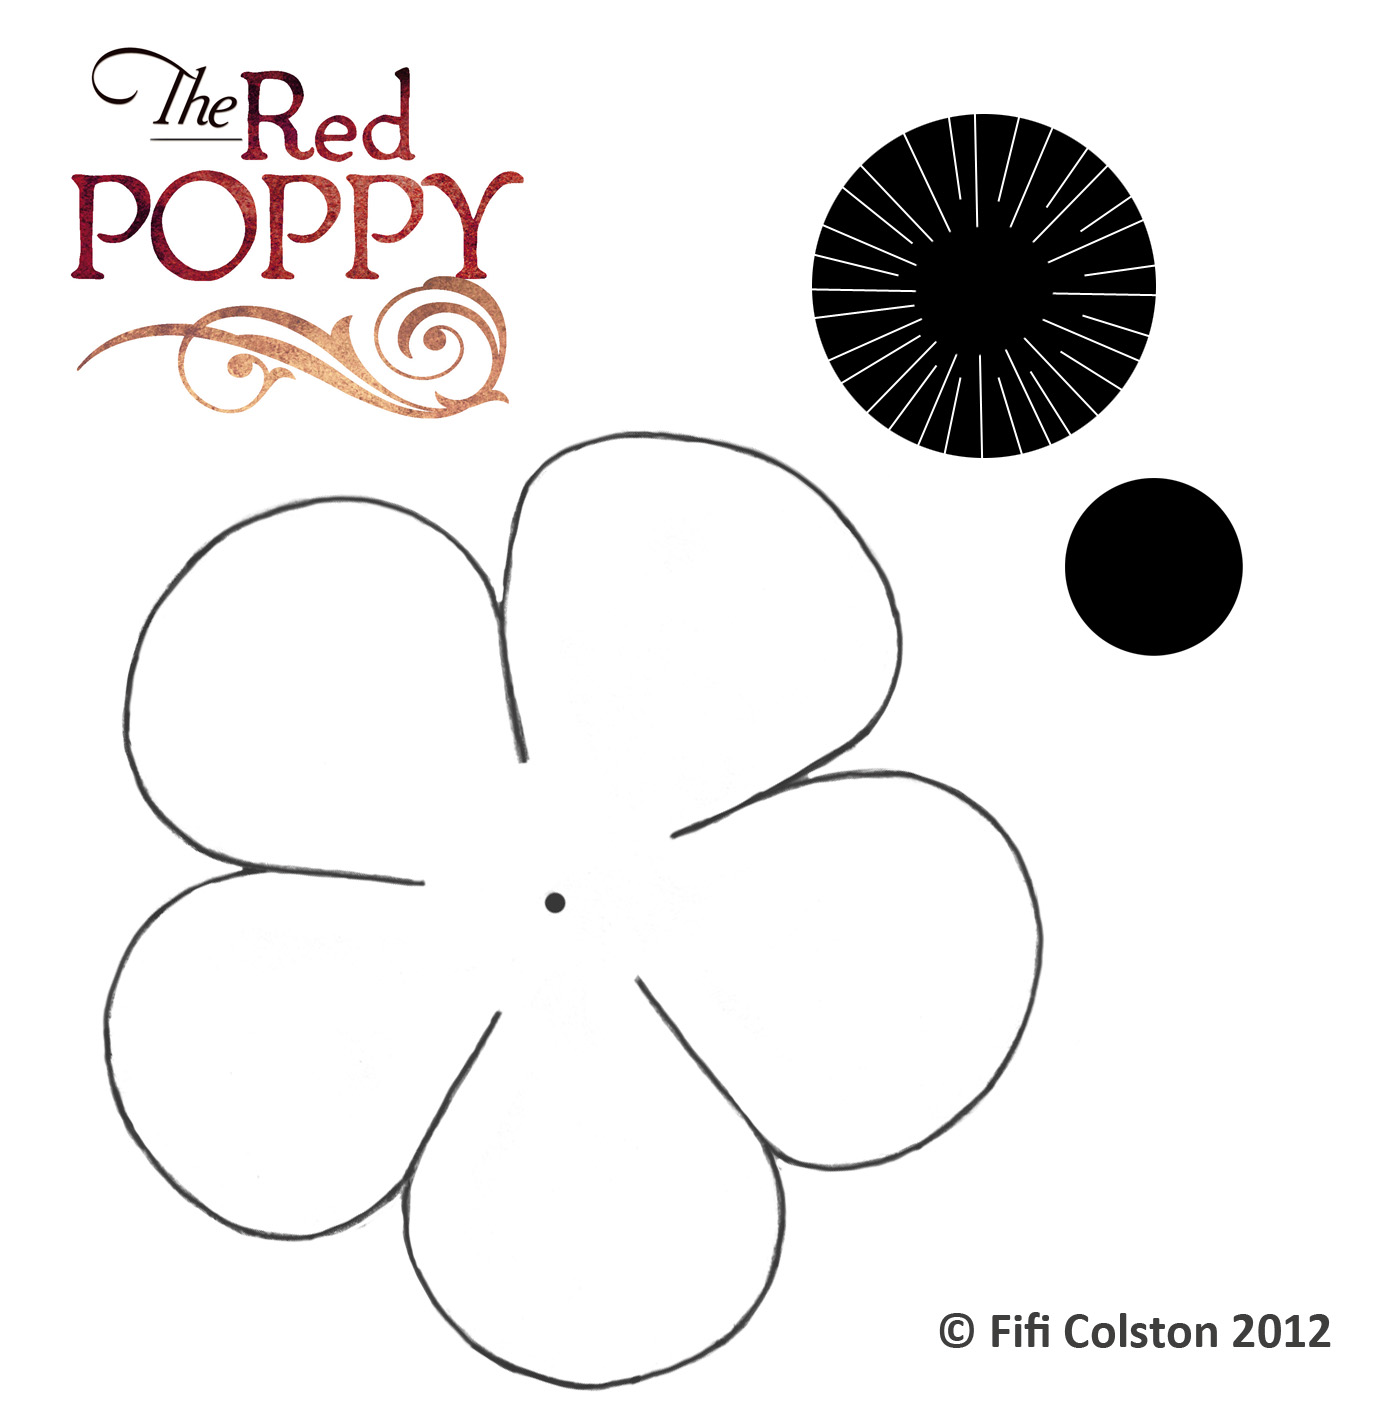 1000+ images about poppy & remembrance | Brooches ...